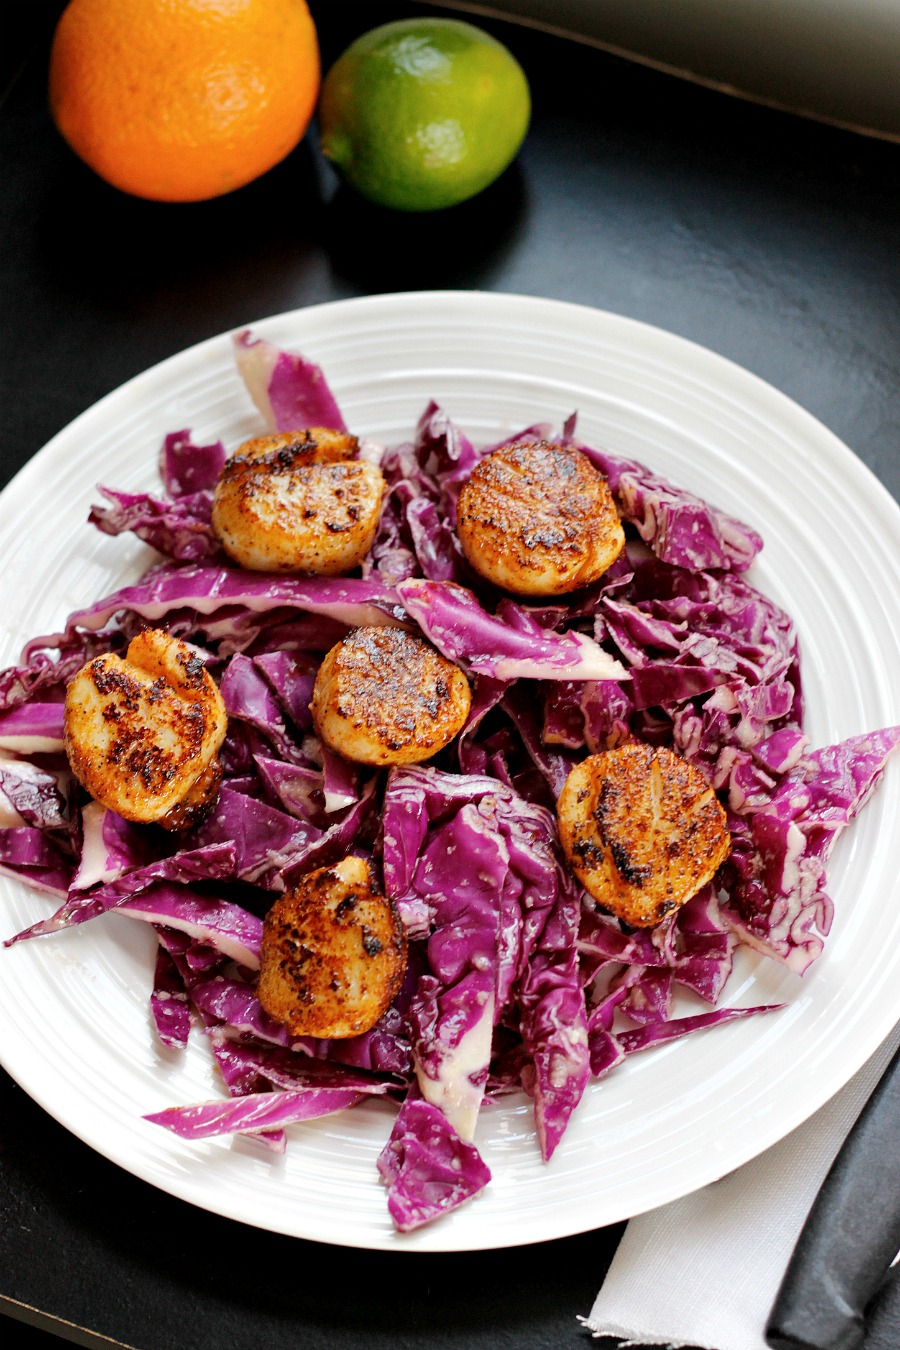 Spicy Pan Seared Scallops over a Red Cabbage Citrus Slaw